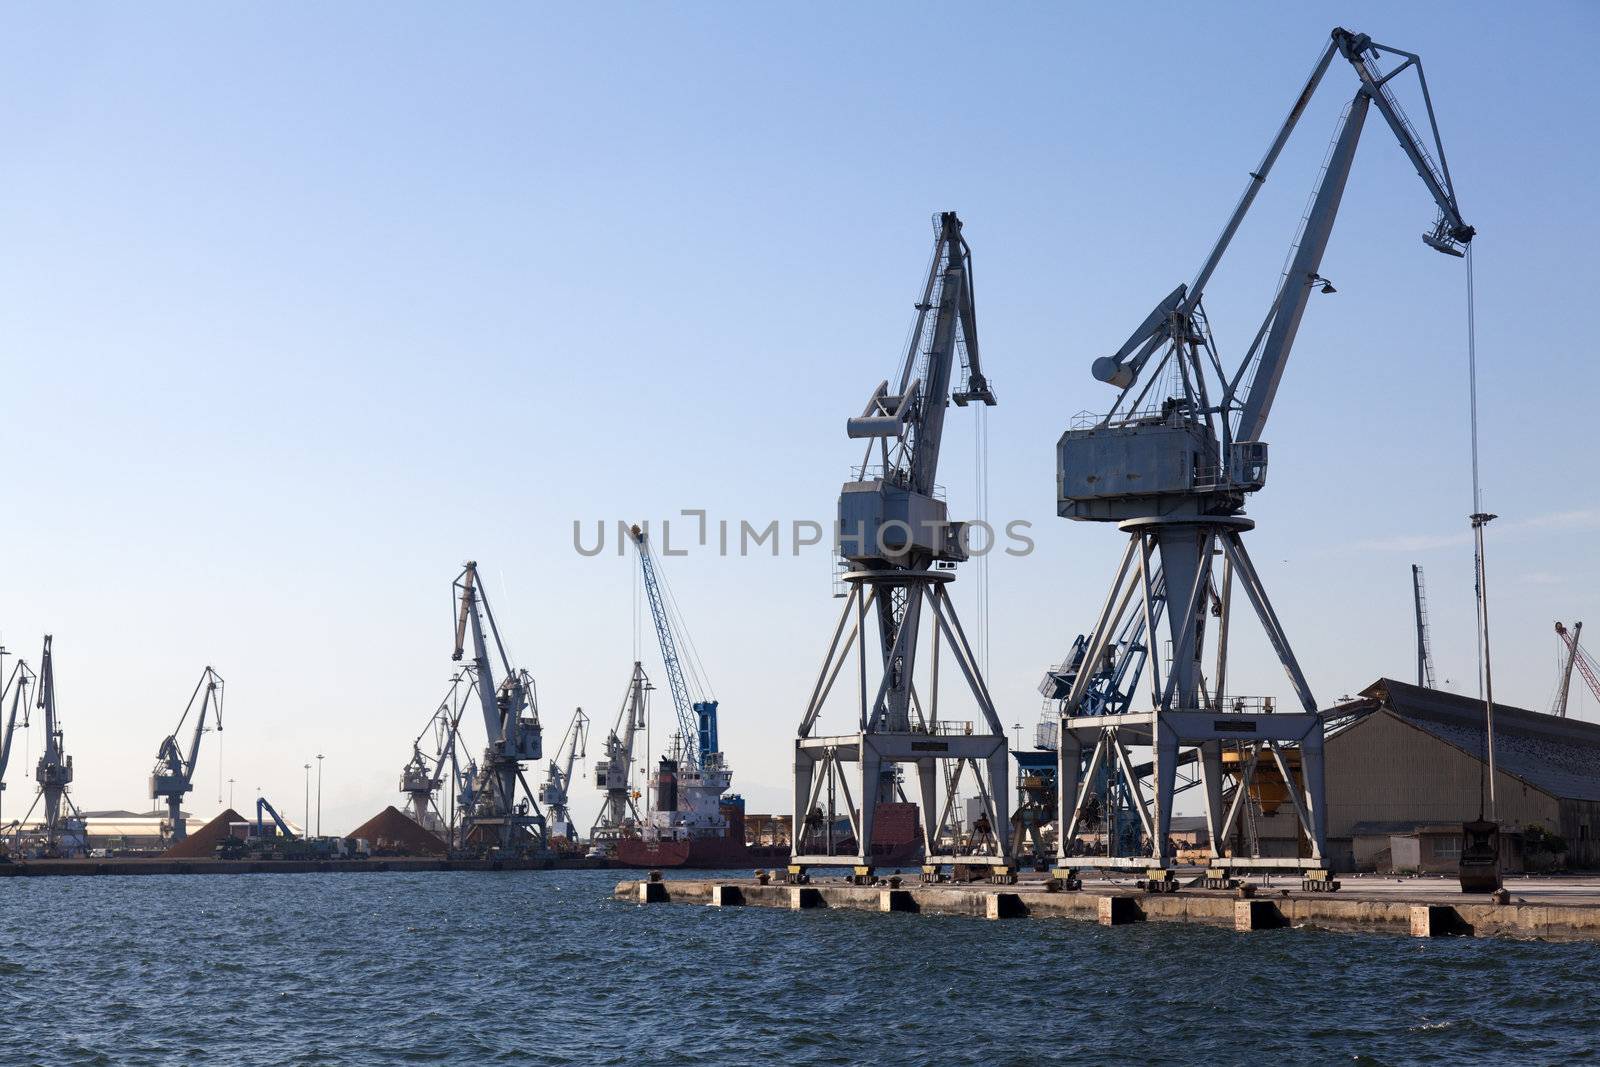 THESSALONIKI, GREECE - SEPTEMBER 29: Large cranes in the commercial section of the port of Thessaloniki working in the transport of products on September 29, 2011 in Thessaloniki, Greece